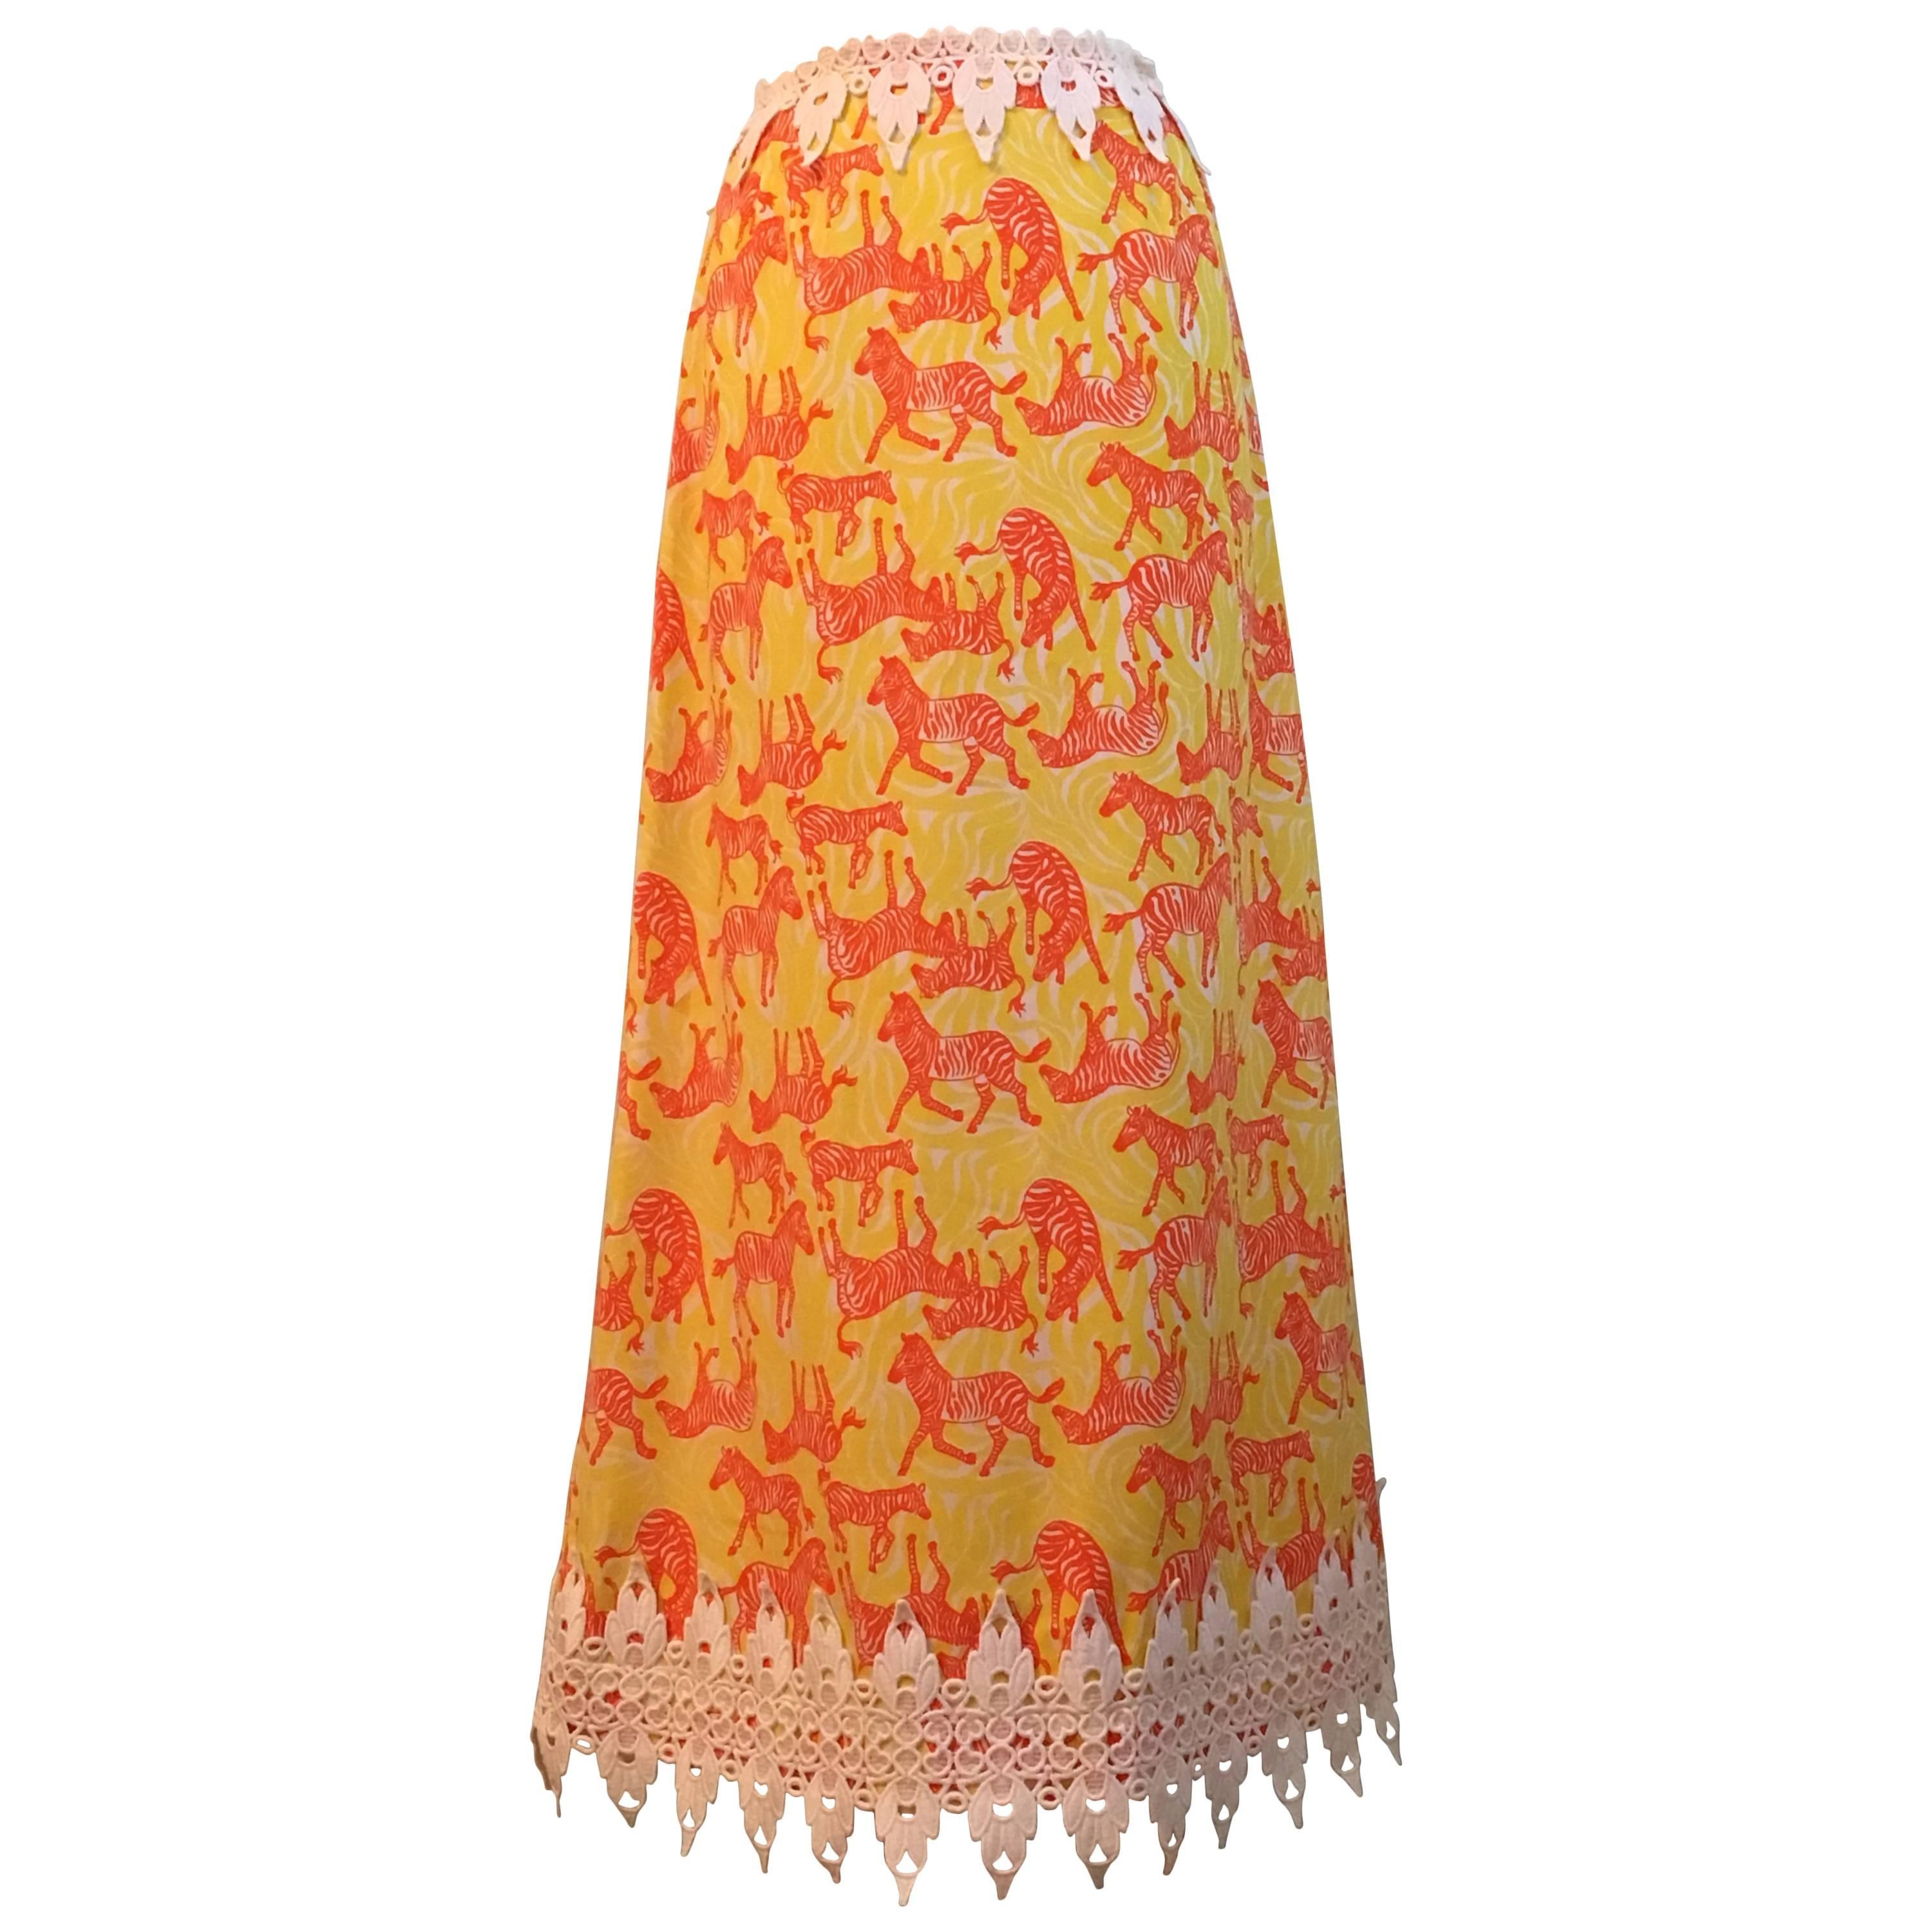 1970s Lilly Pulitzer Maxi Skirt with Zebra Print in Orange and Yellow  For Sale